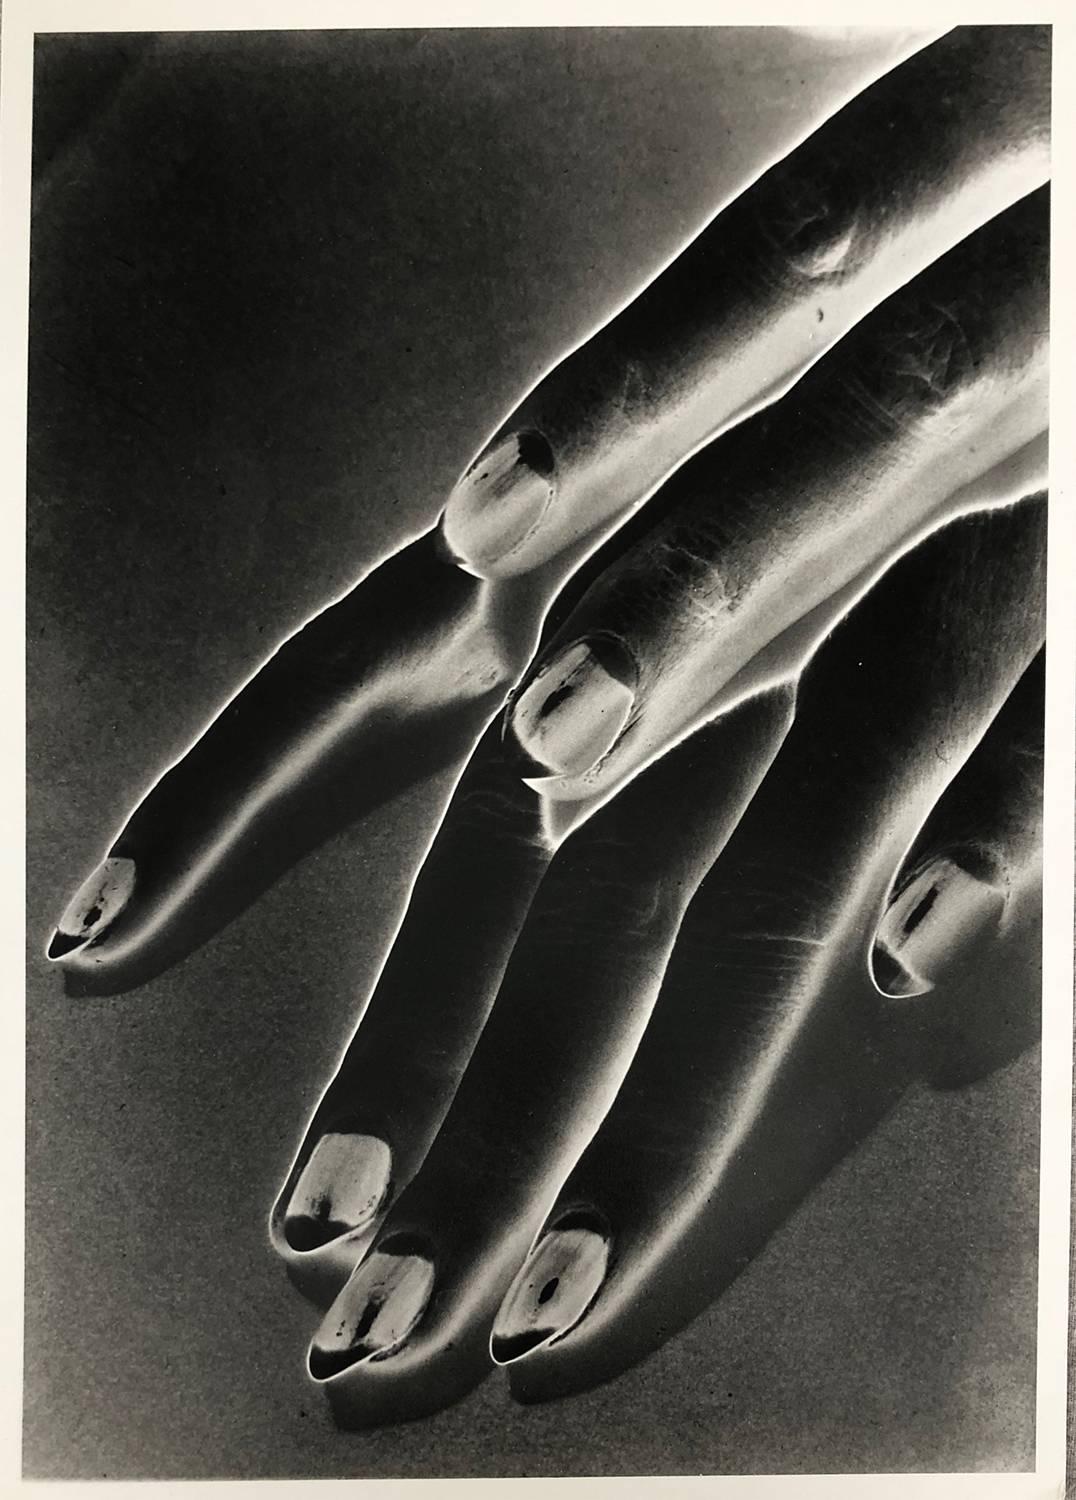 Study of Hands, Negative Solarization print, Framed - Photograph by Man Ray